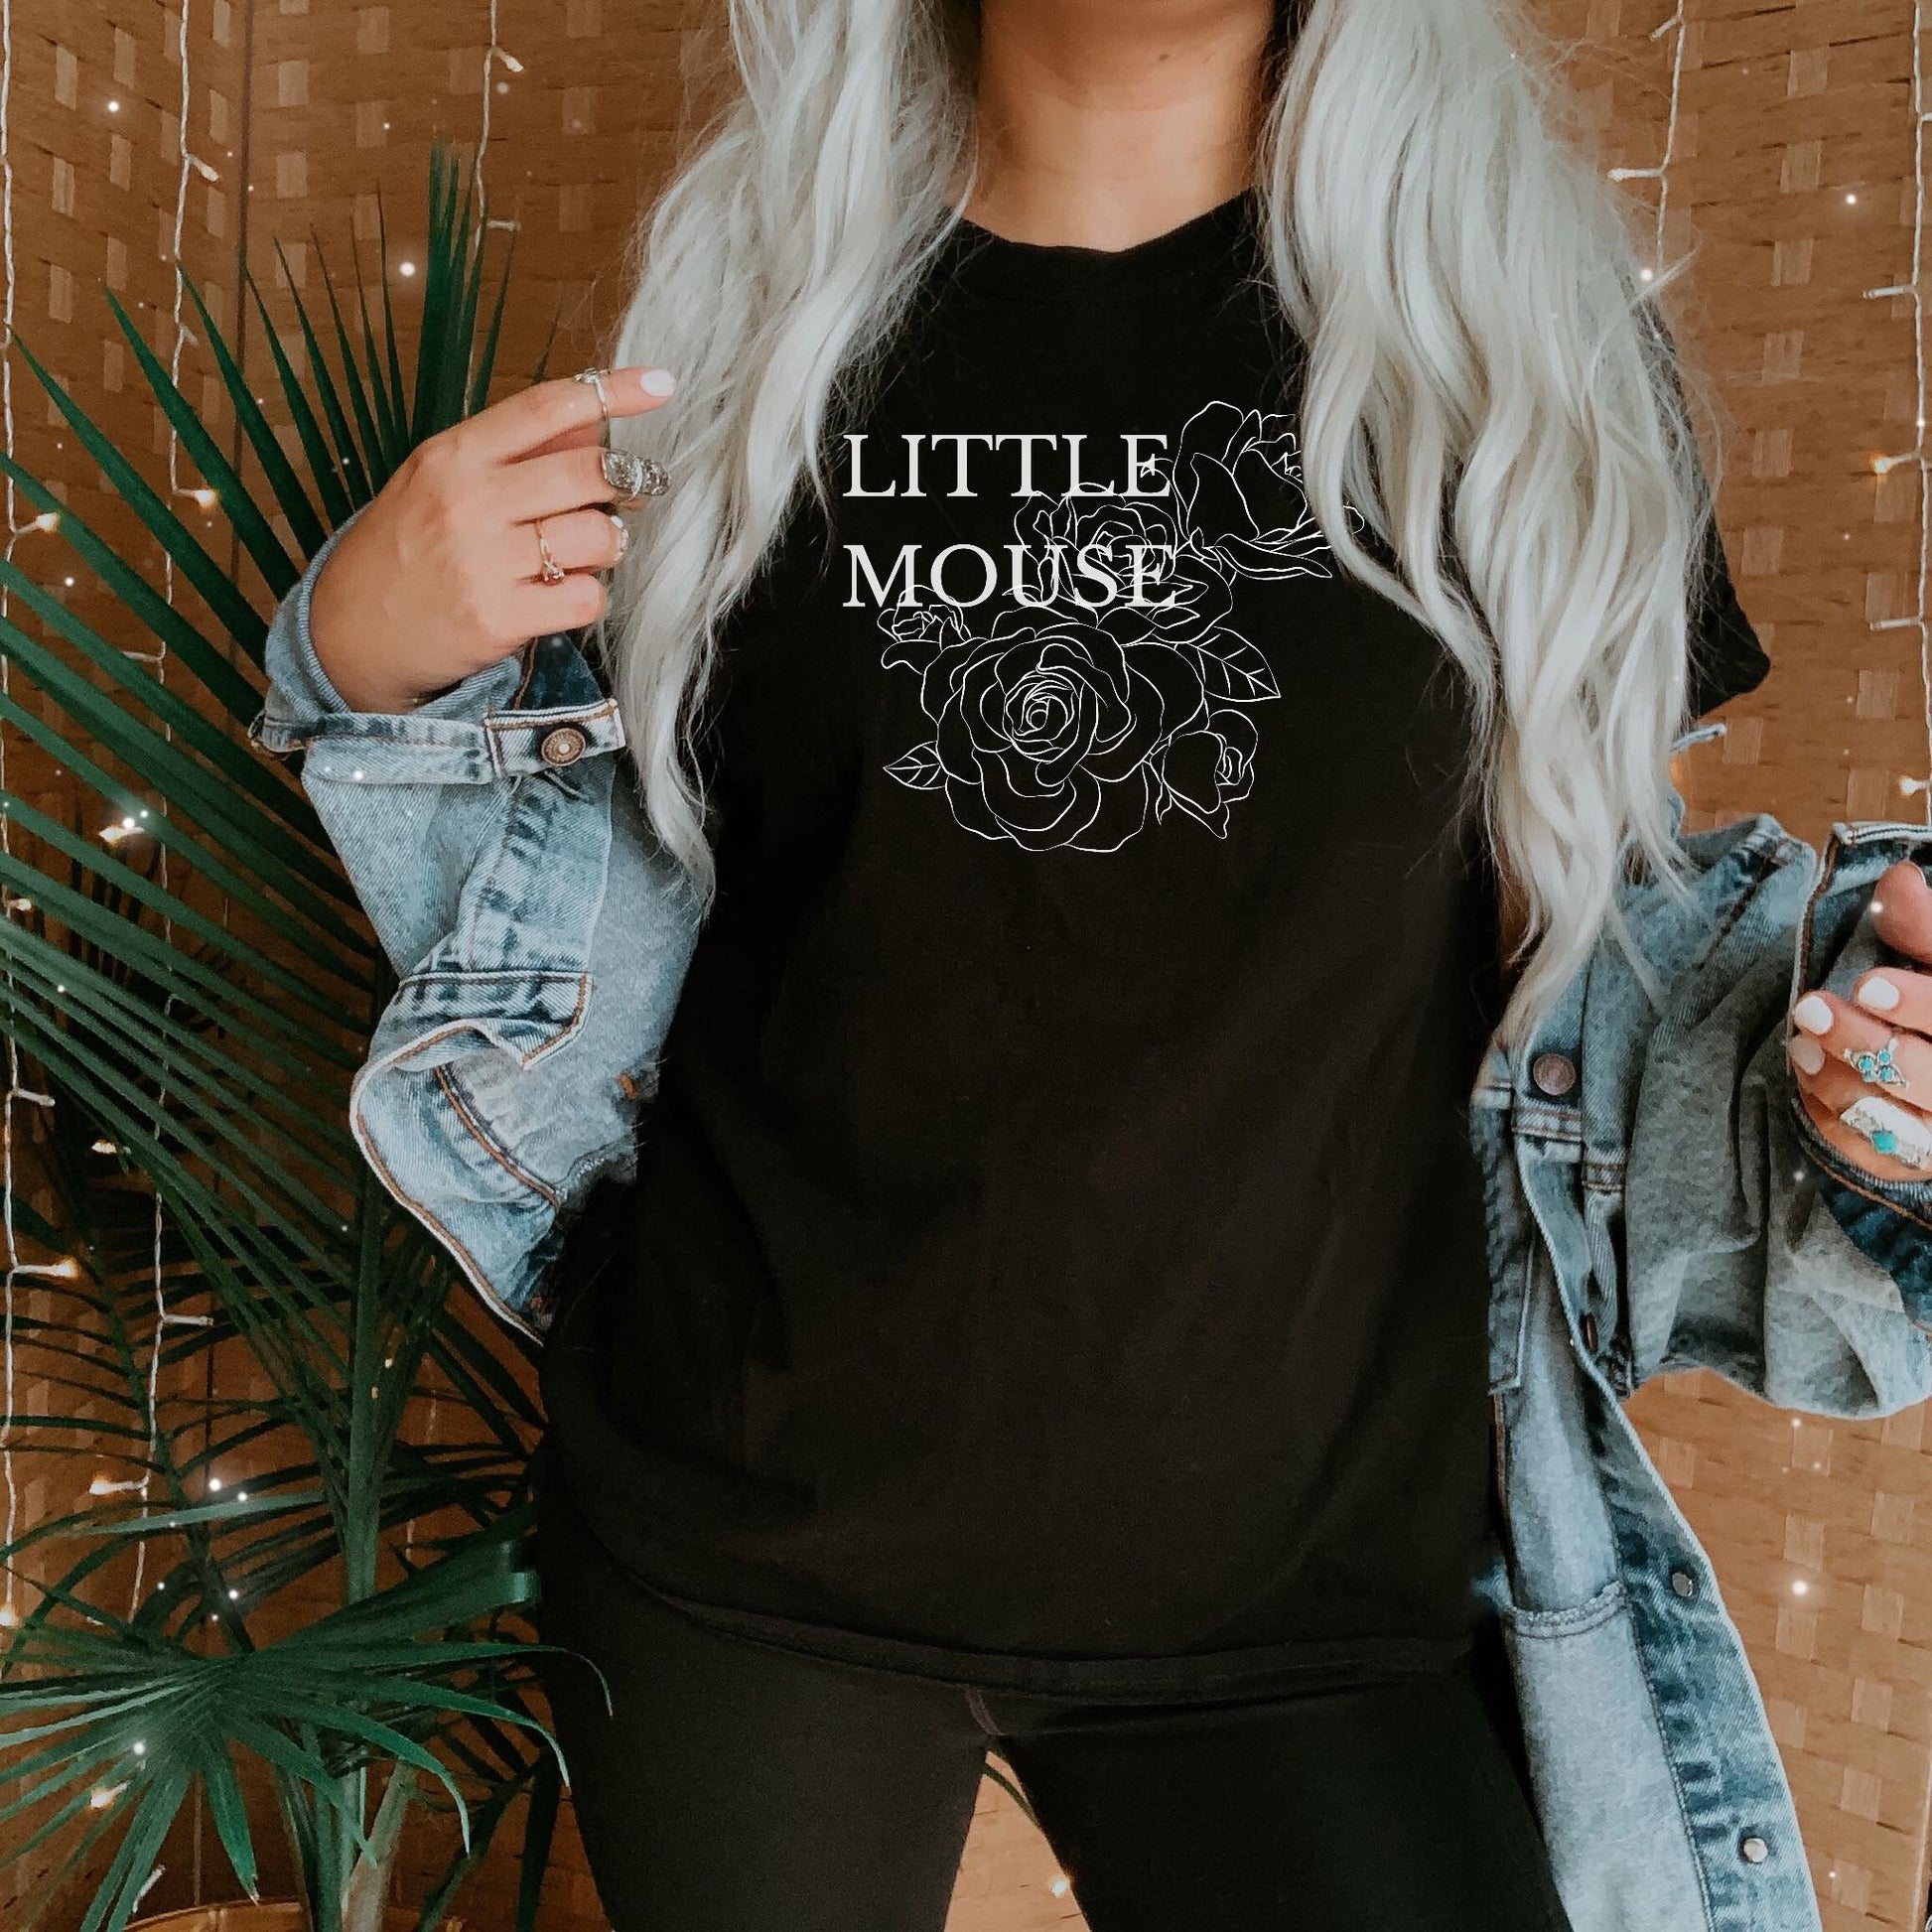 Haunting Adeline inspired t-shirt with Little Mouse and rose design. –  Romantasy Designs